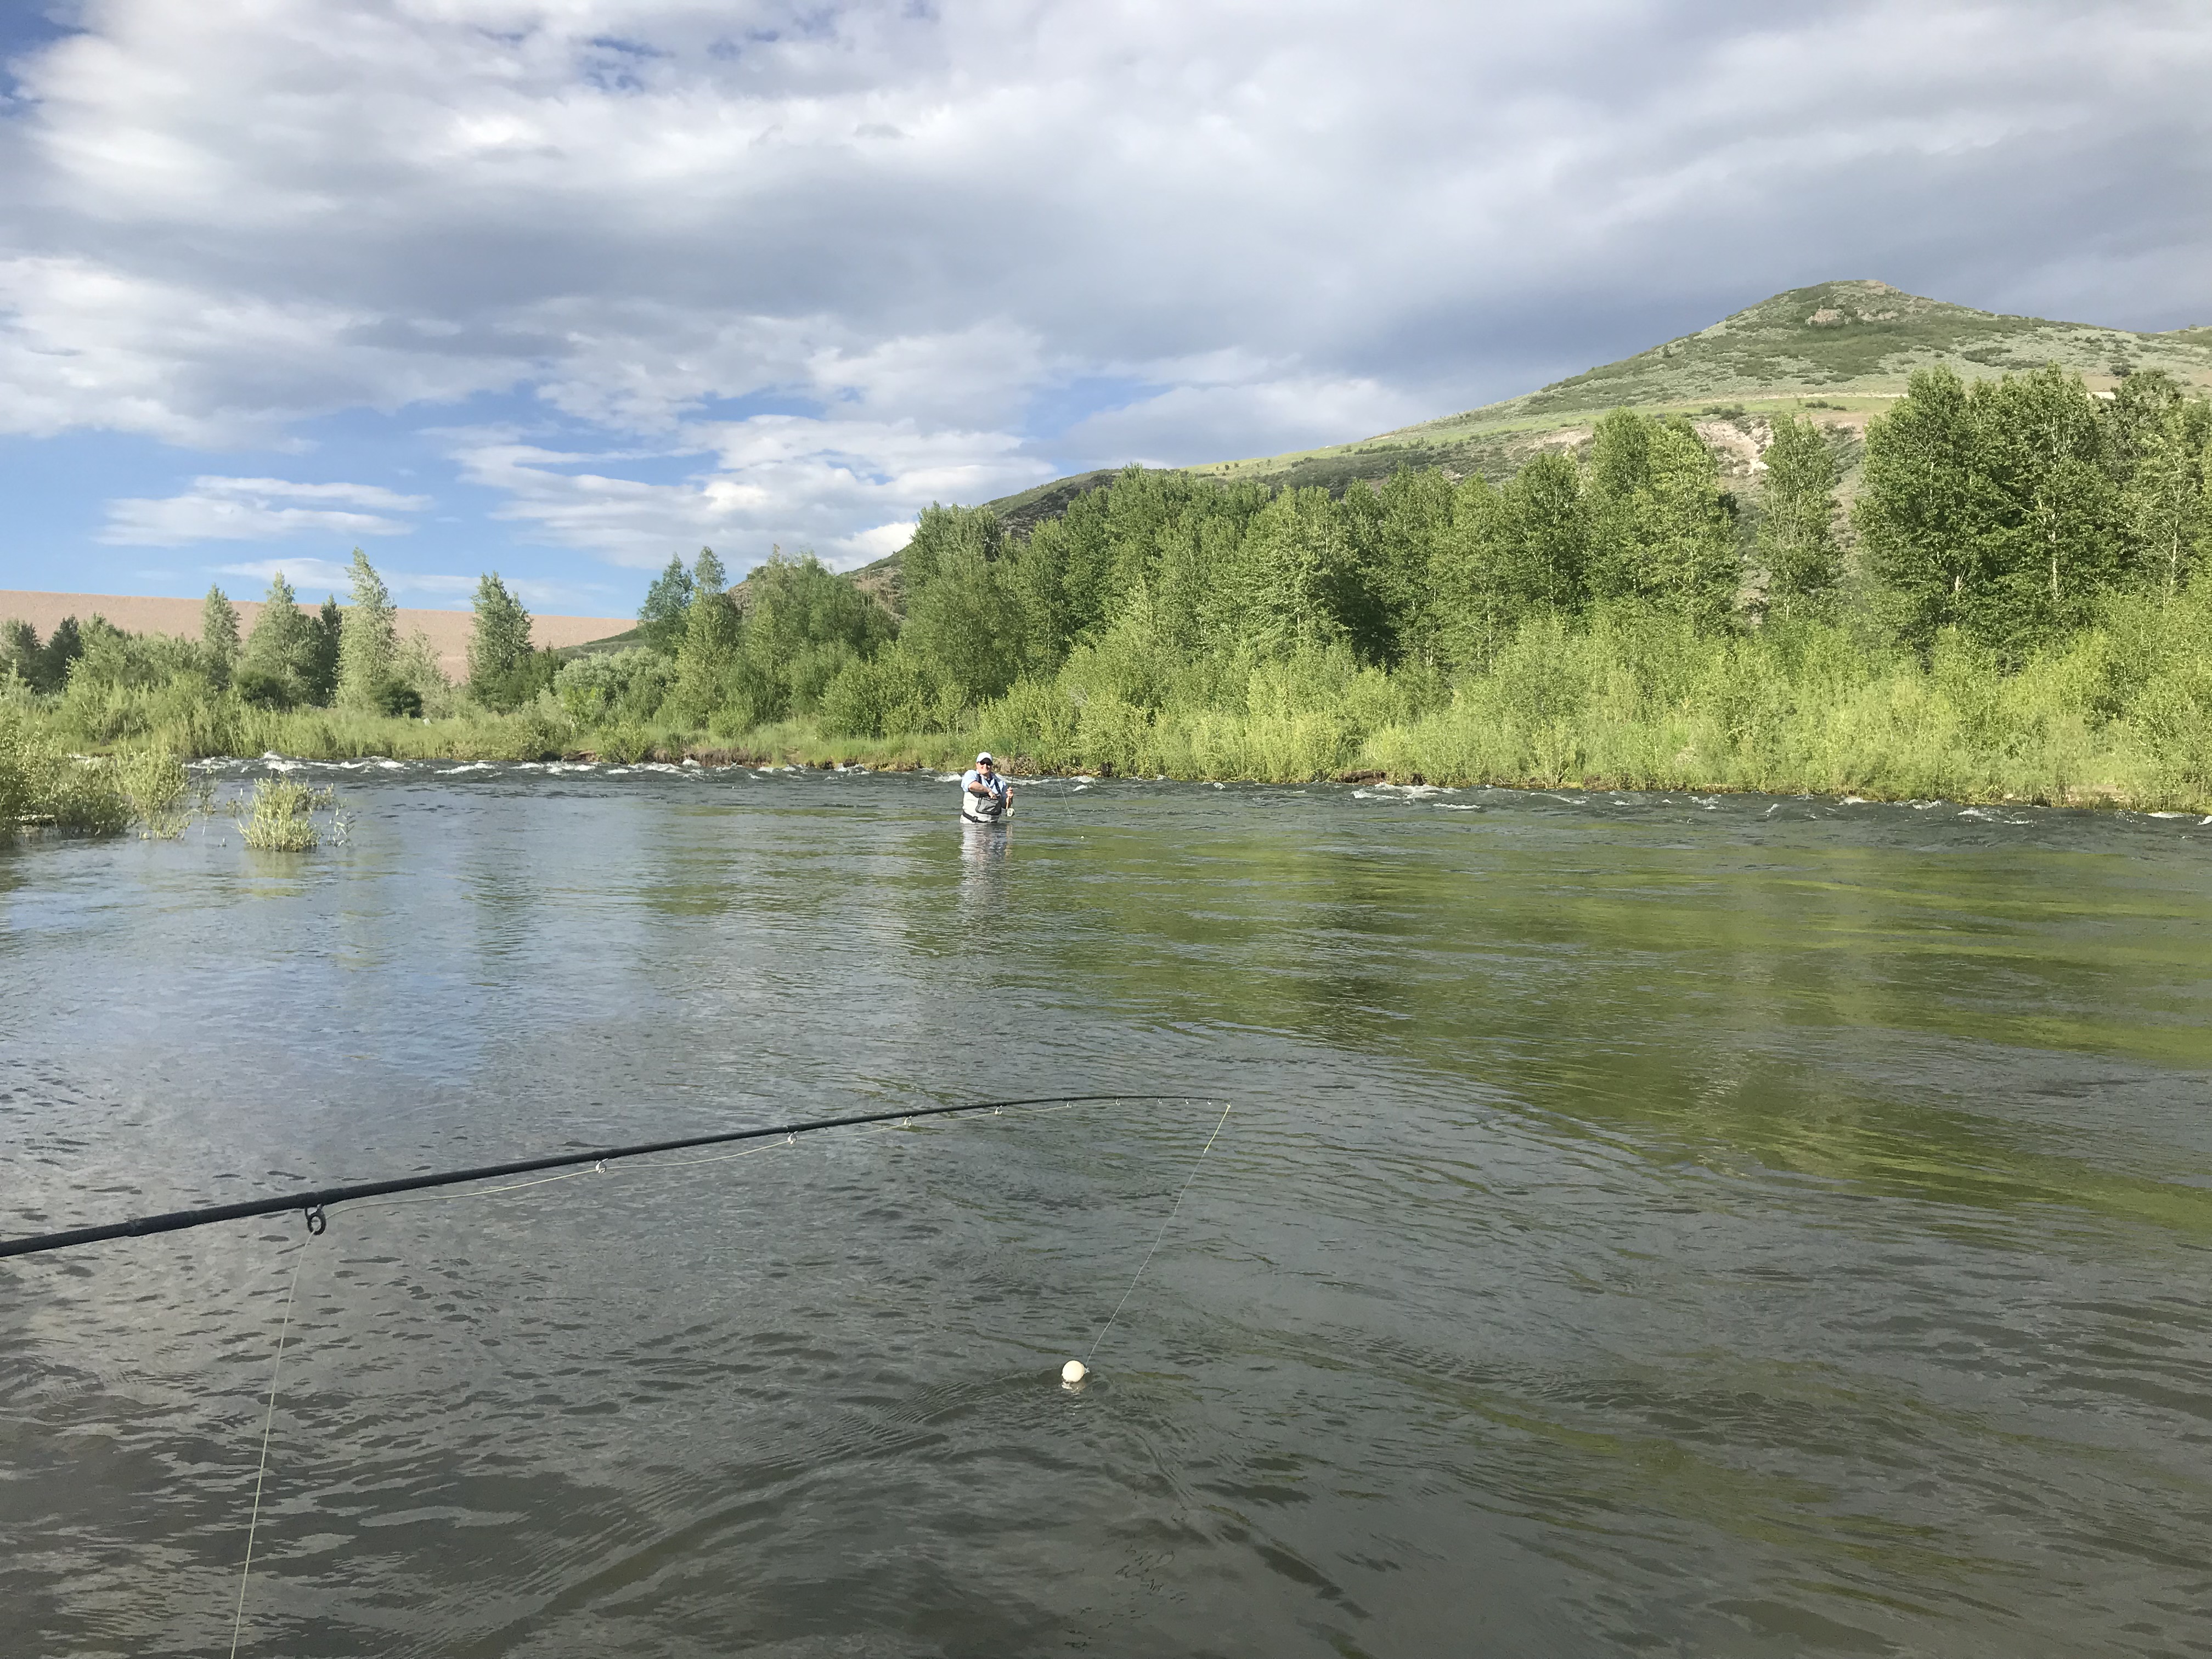 In the Provo river fly fishing with Moira in Park City | SixOhSix